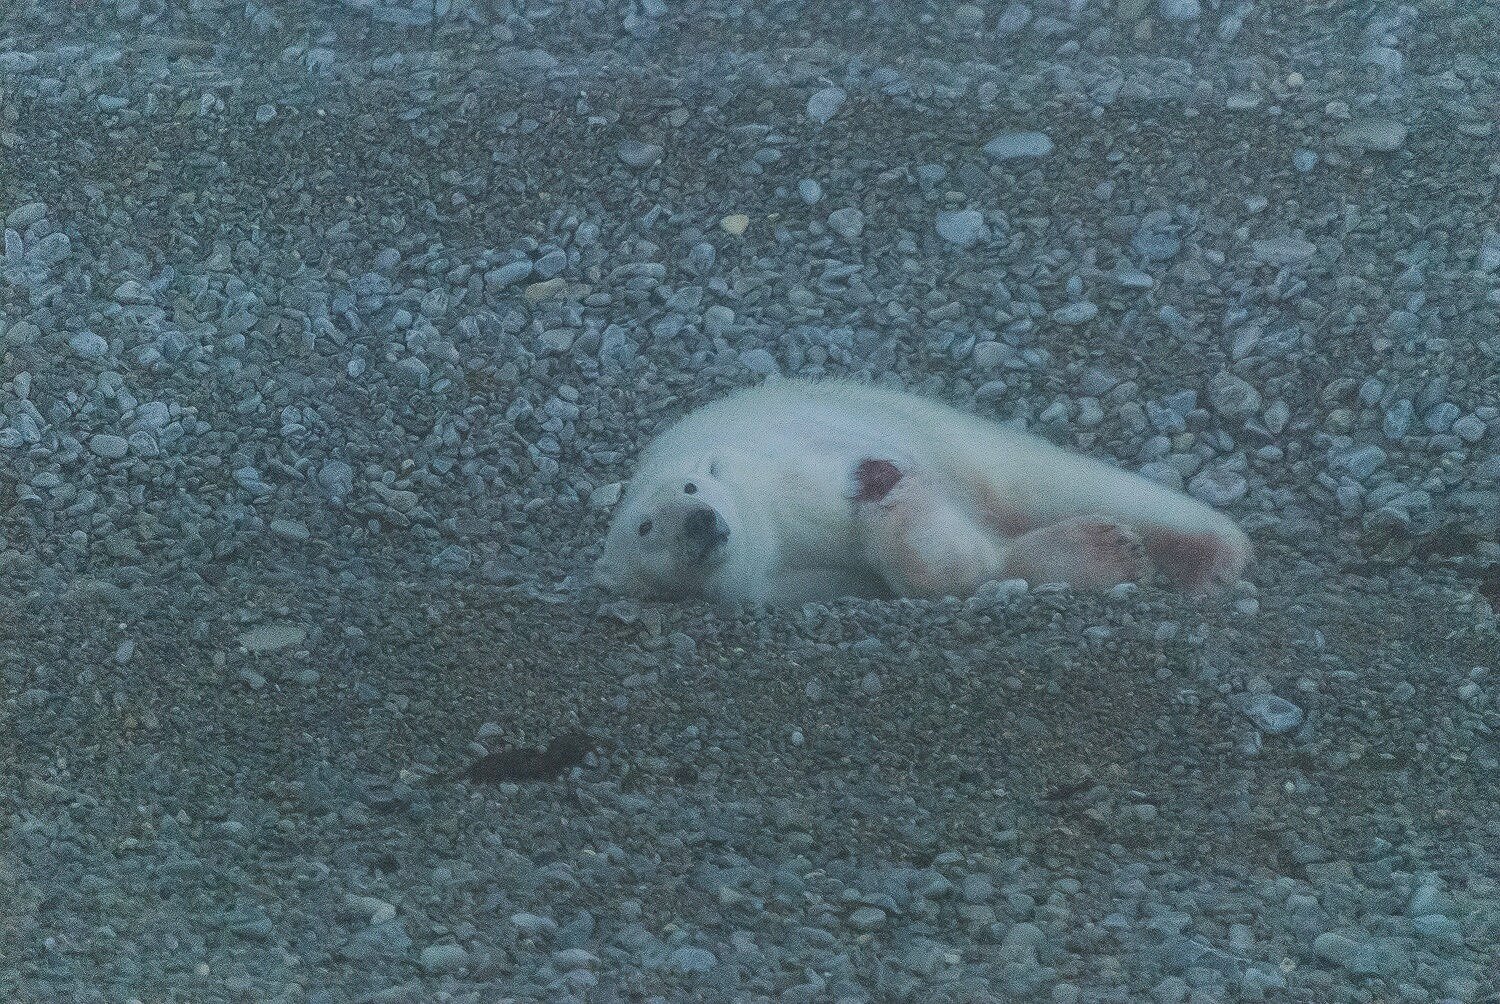 Mortally Wounded Stranded Polar Bear, Killed By Another Polar Bear Due To Food Stress 